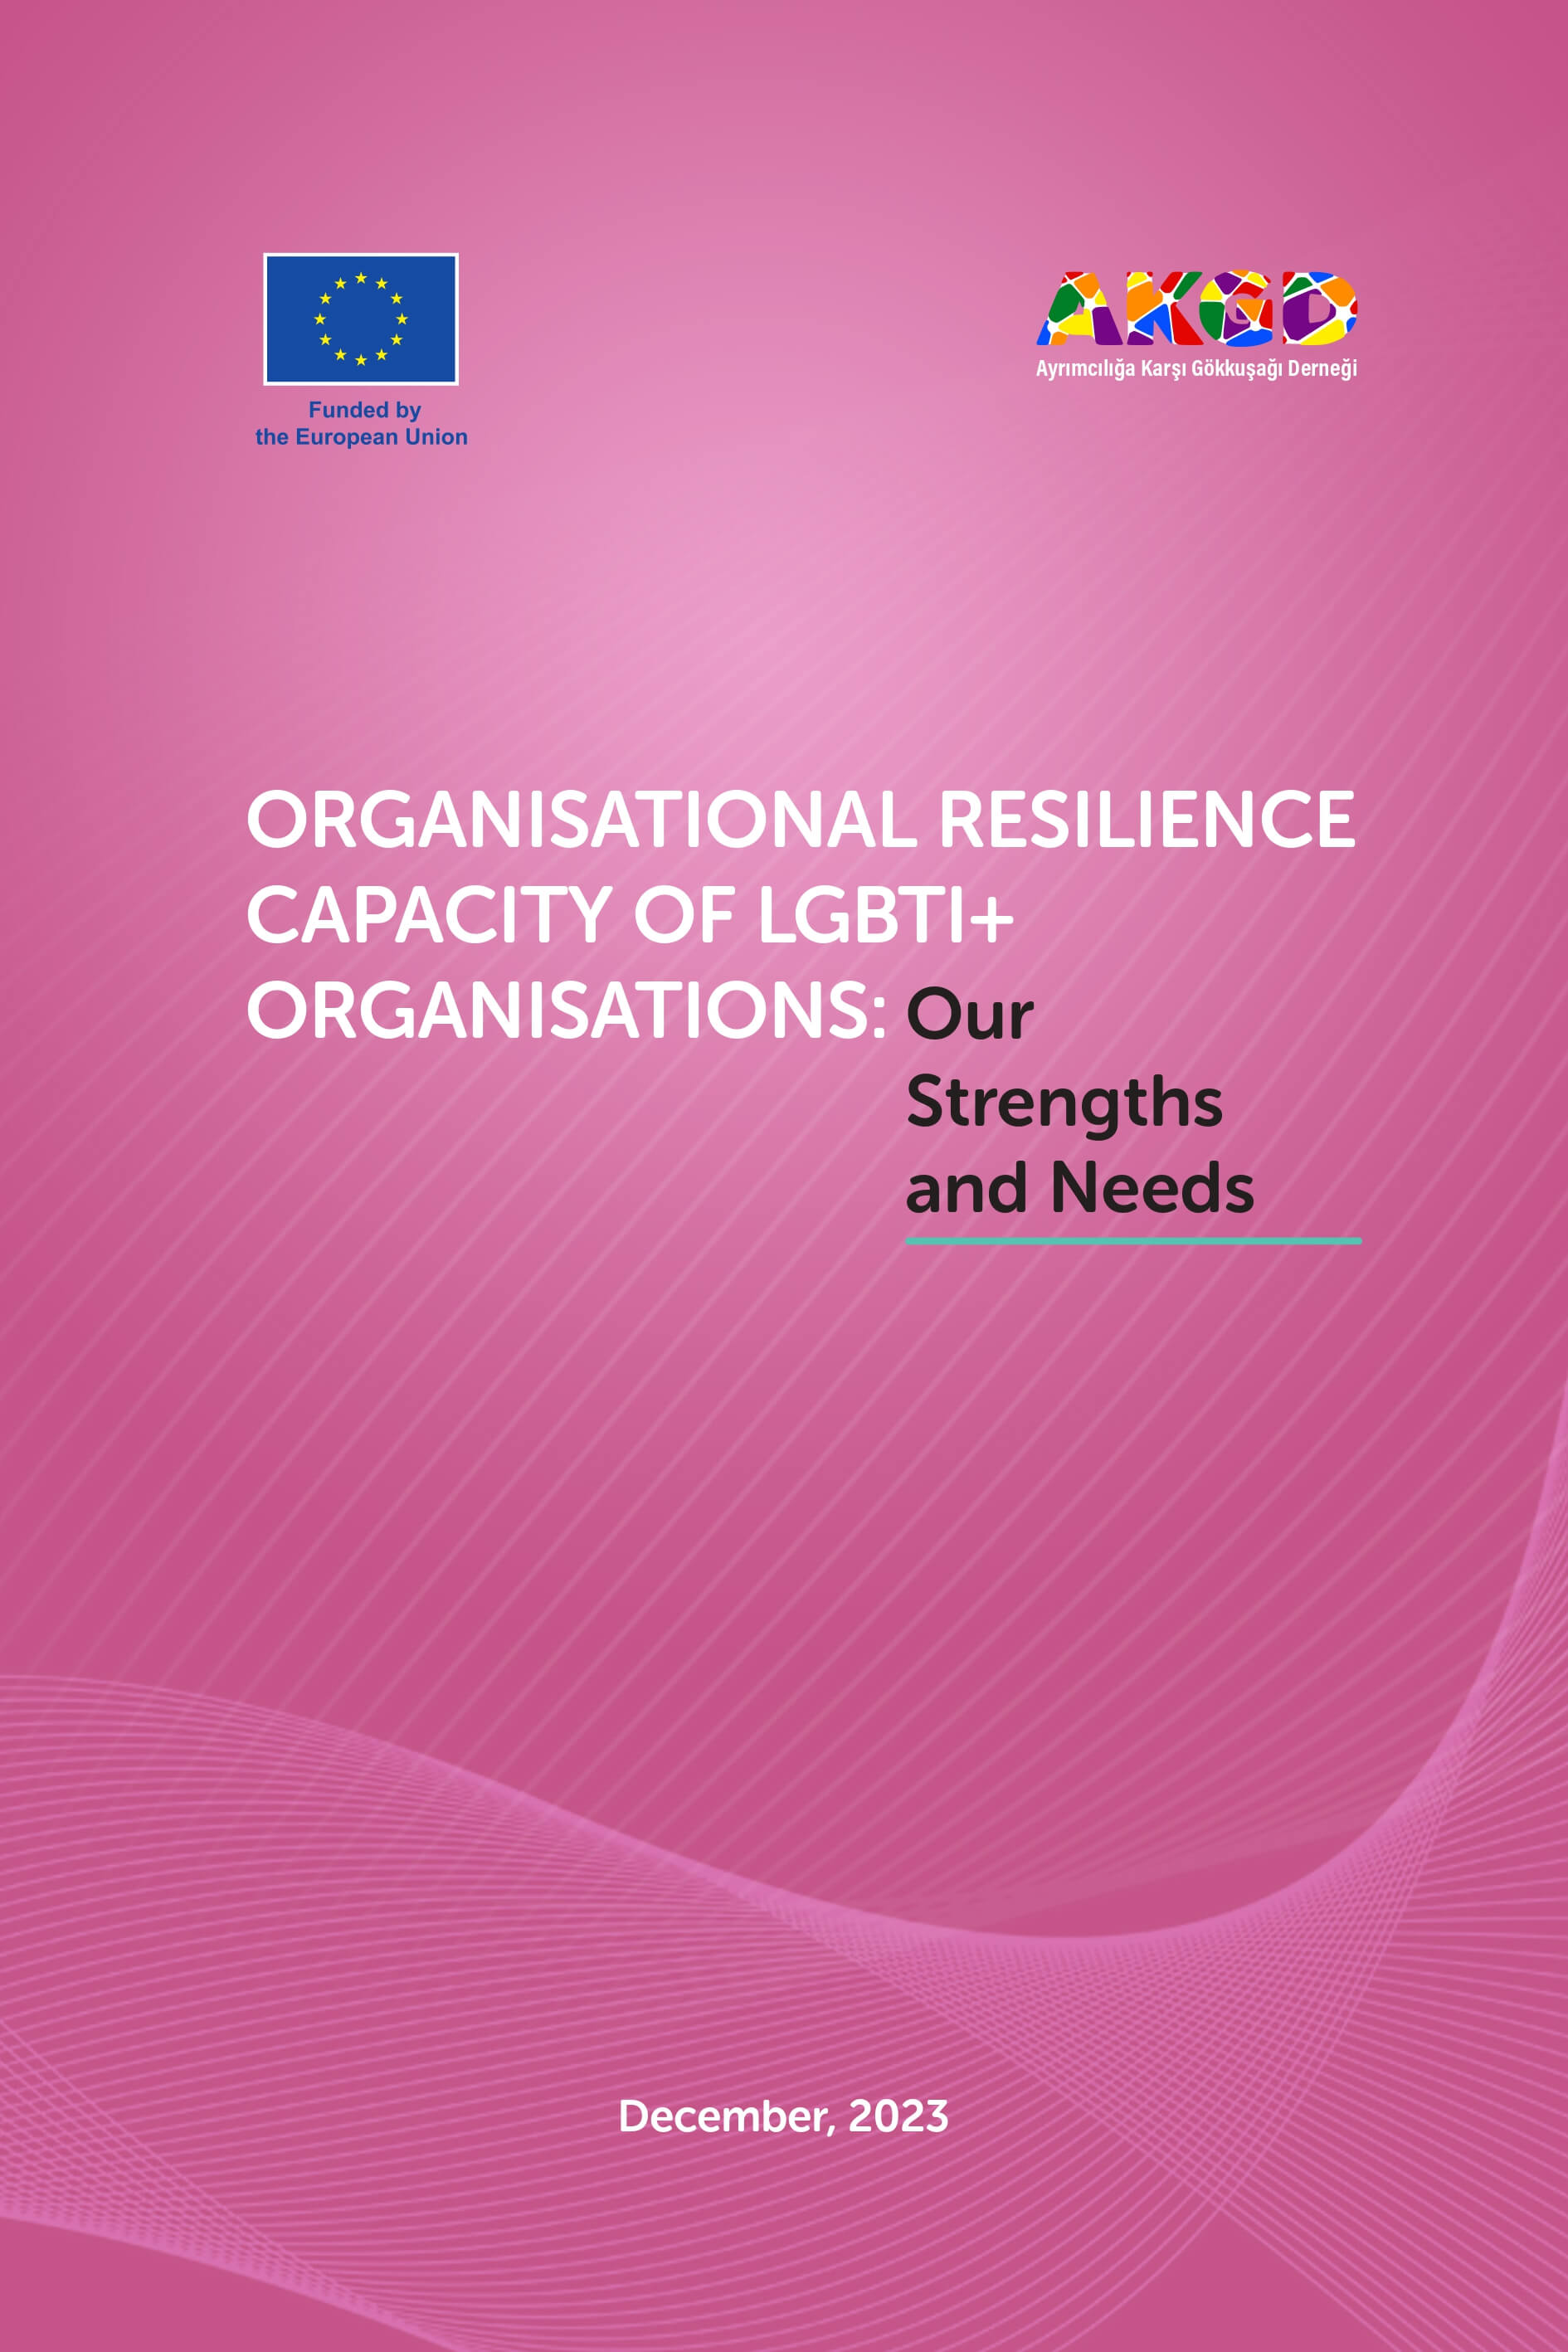 Organisational Resilience Capacity of LGBTI+ Organisations: Our Strengths and Needs - Rainbow Association Against Discrimination